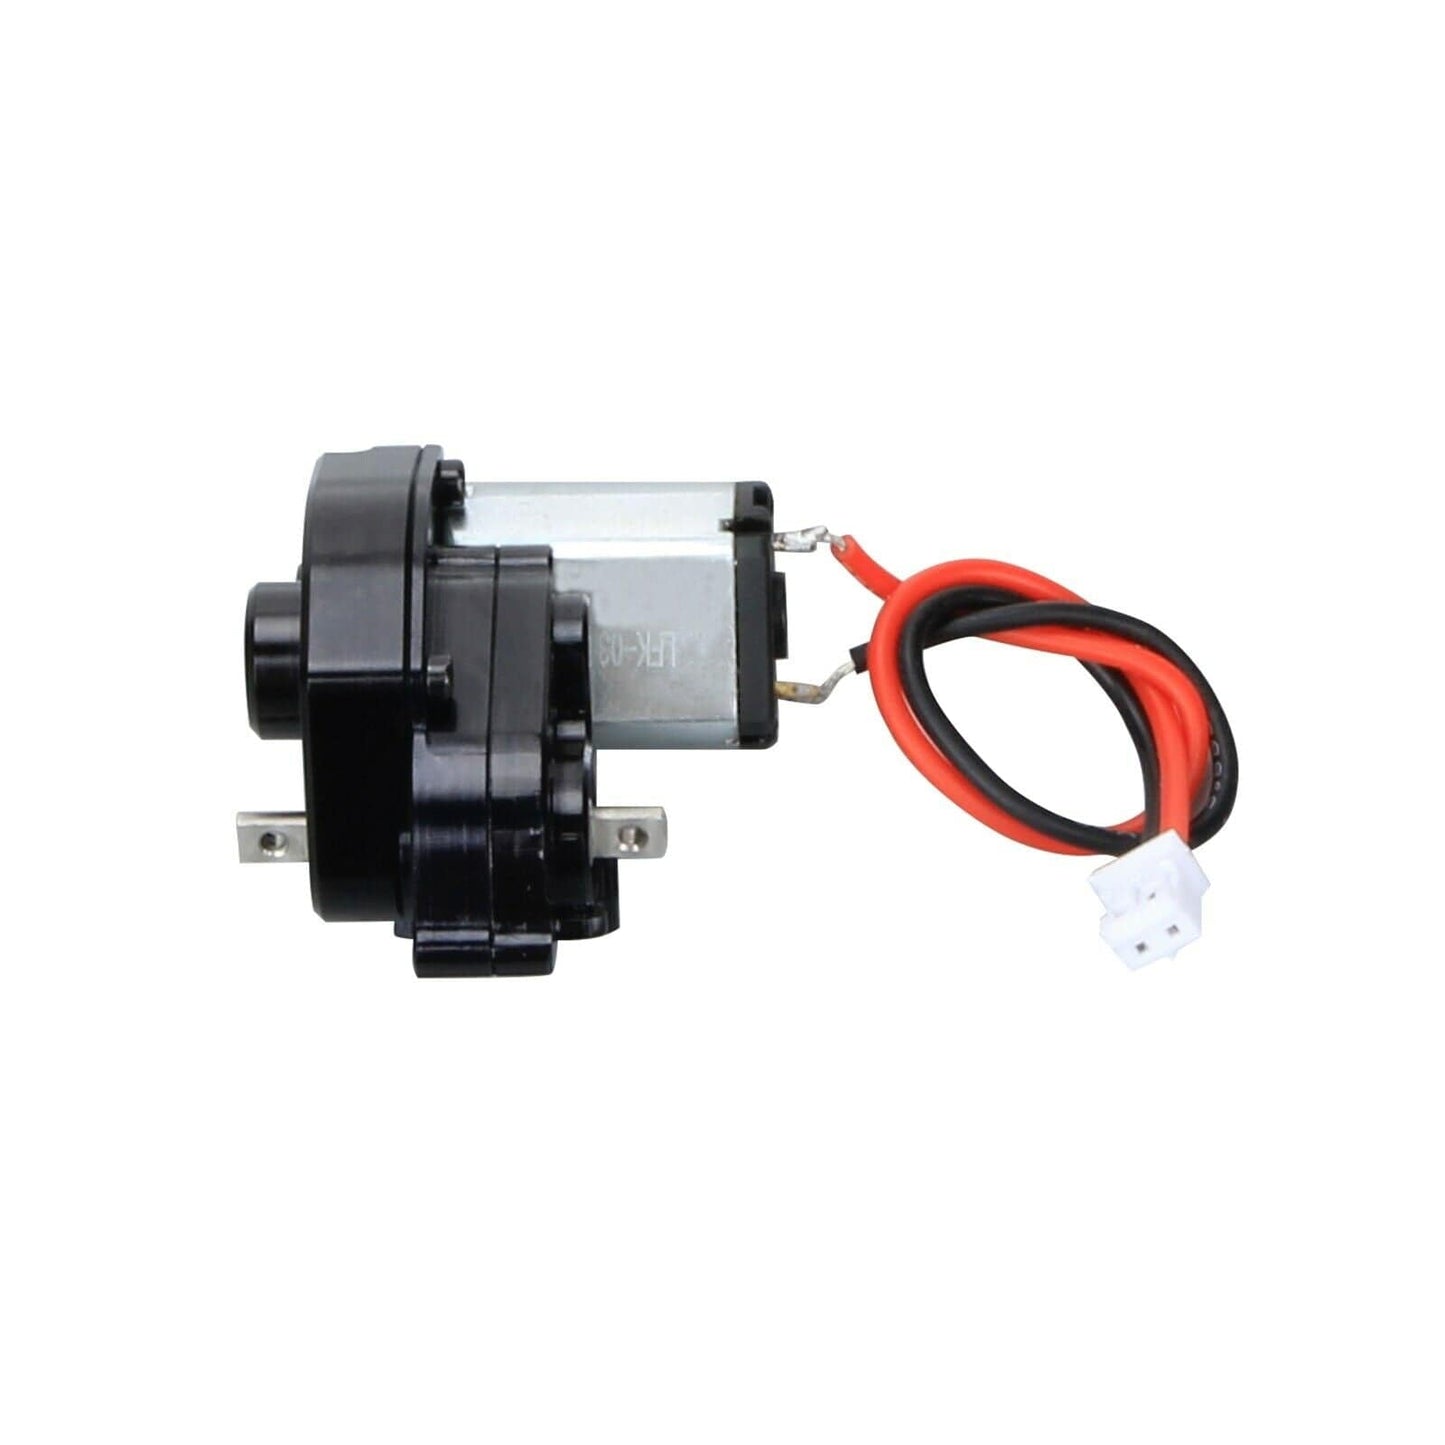 RCAWD SCX24 upgrade 030 55T Motor Full Metal Gearbox Assembled AXI31608 compatiable with AX24 - RCAWD